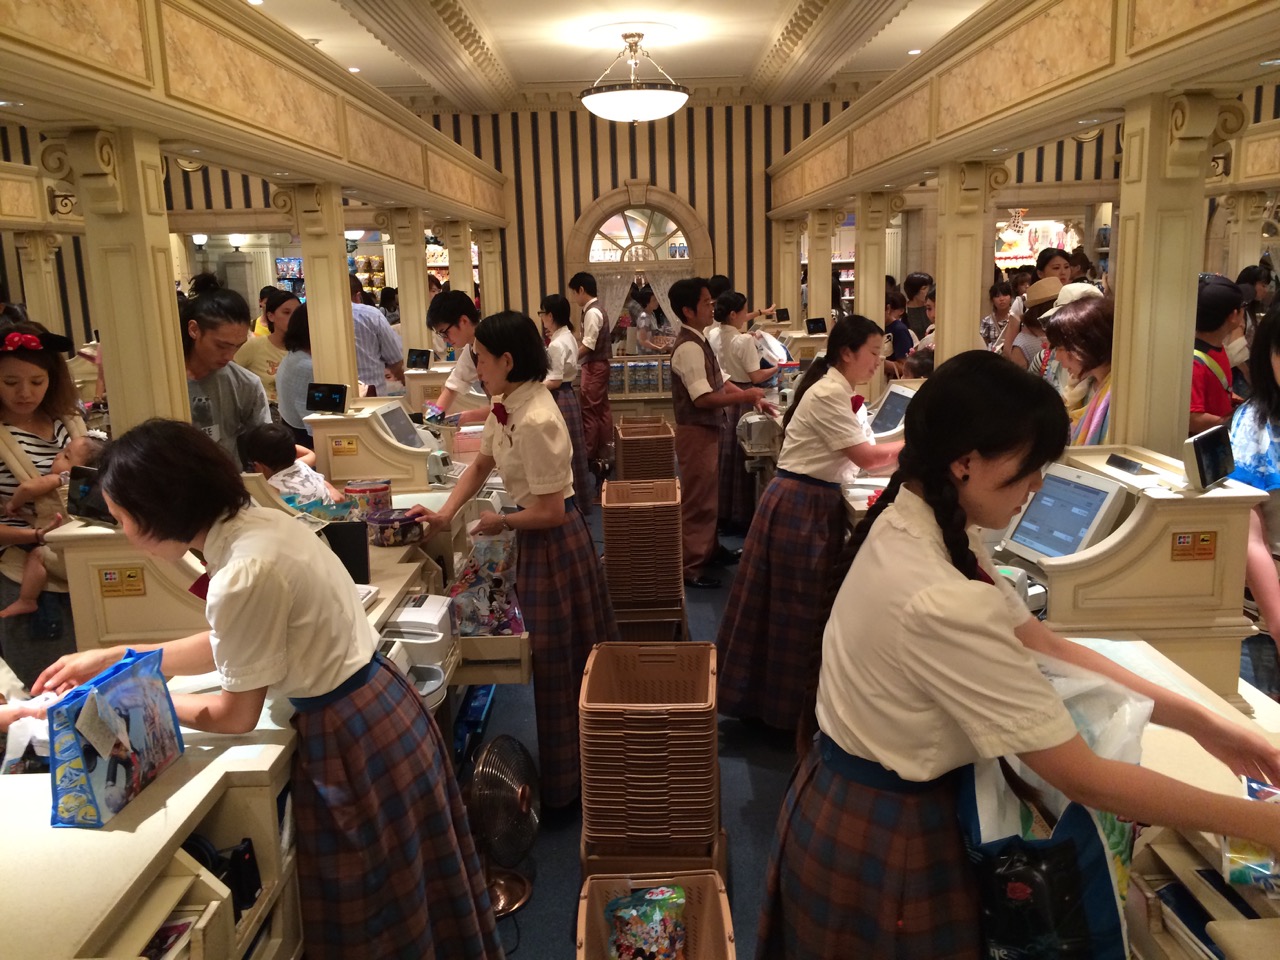 The same checkout concept in Tokyo Disneyland, also with a banking-style theme. Photo by J. Jeff Kober.